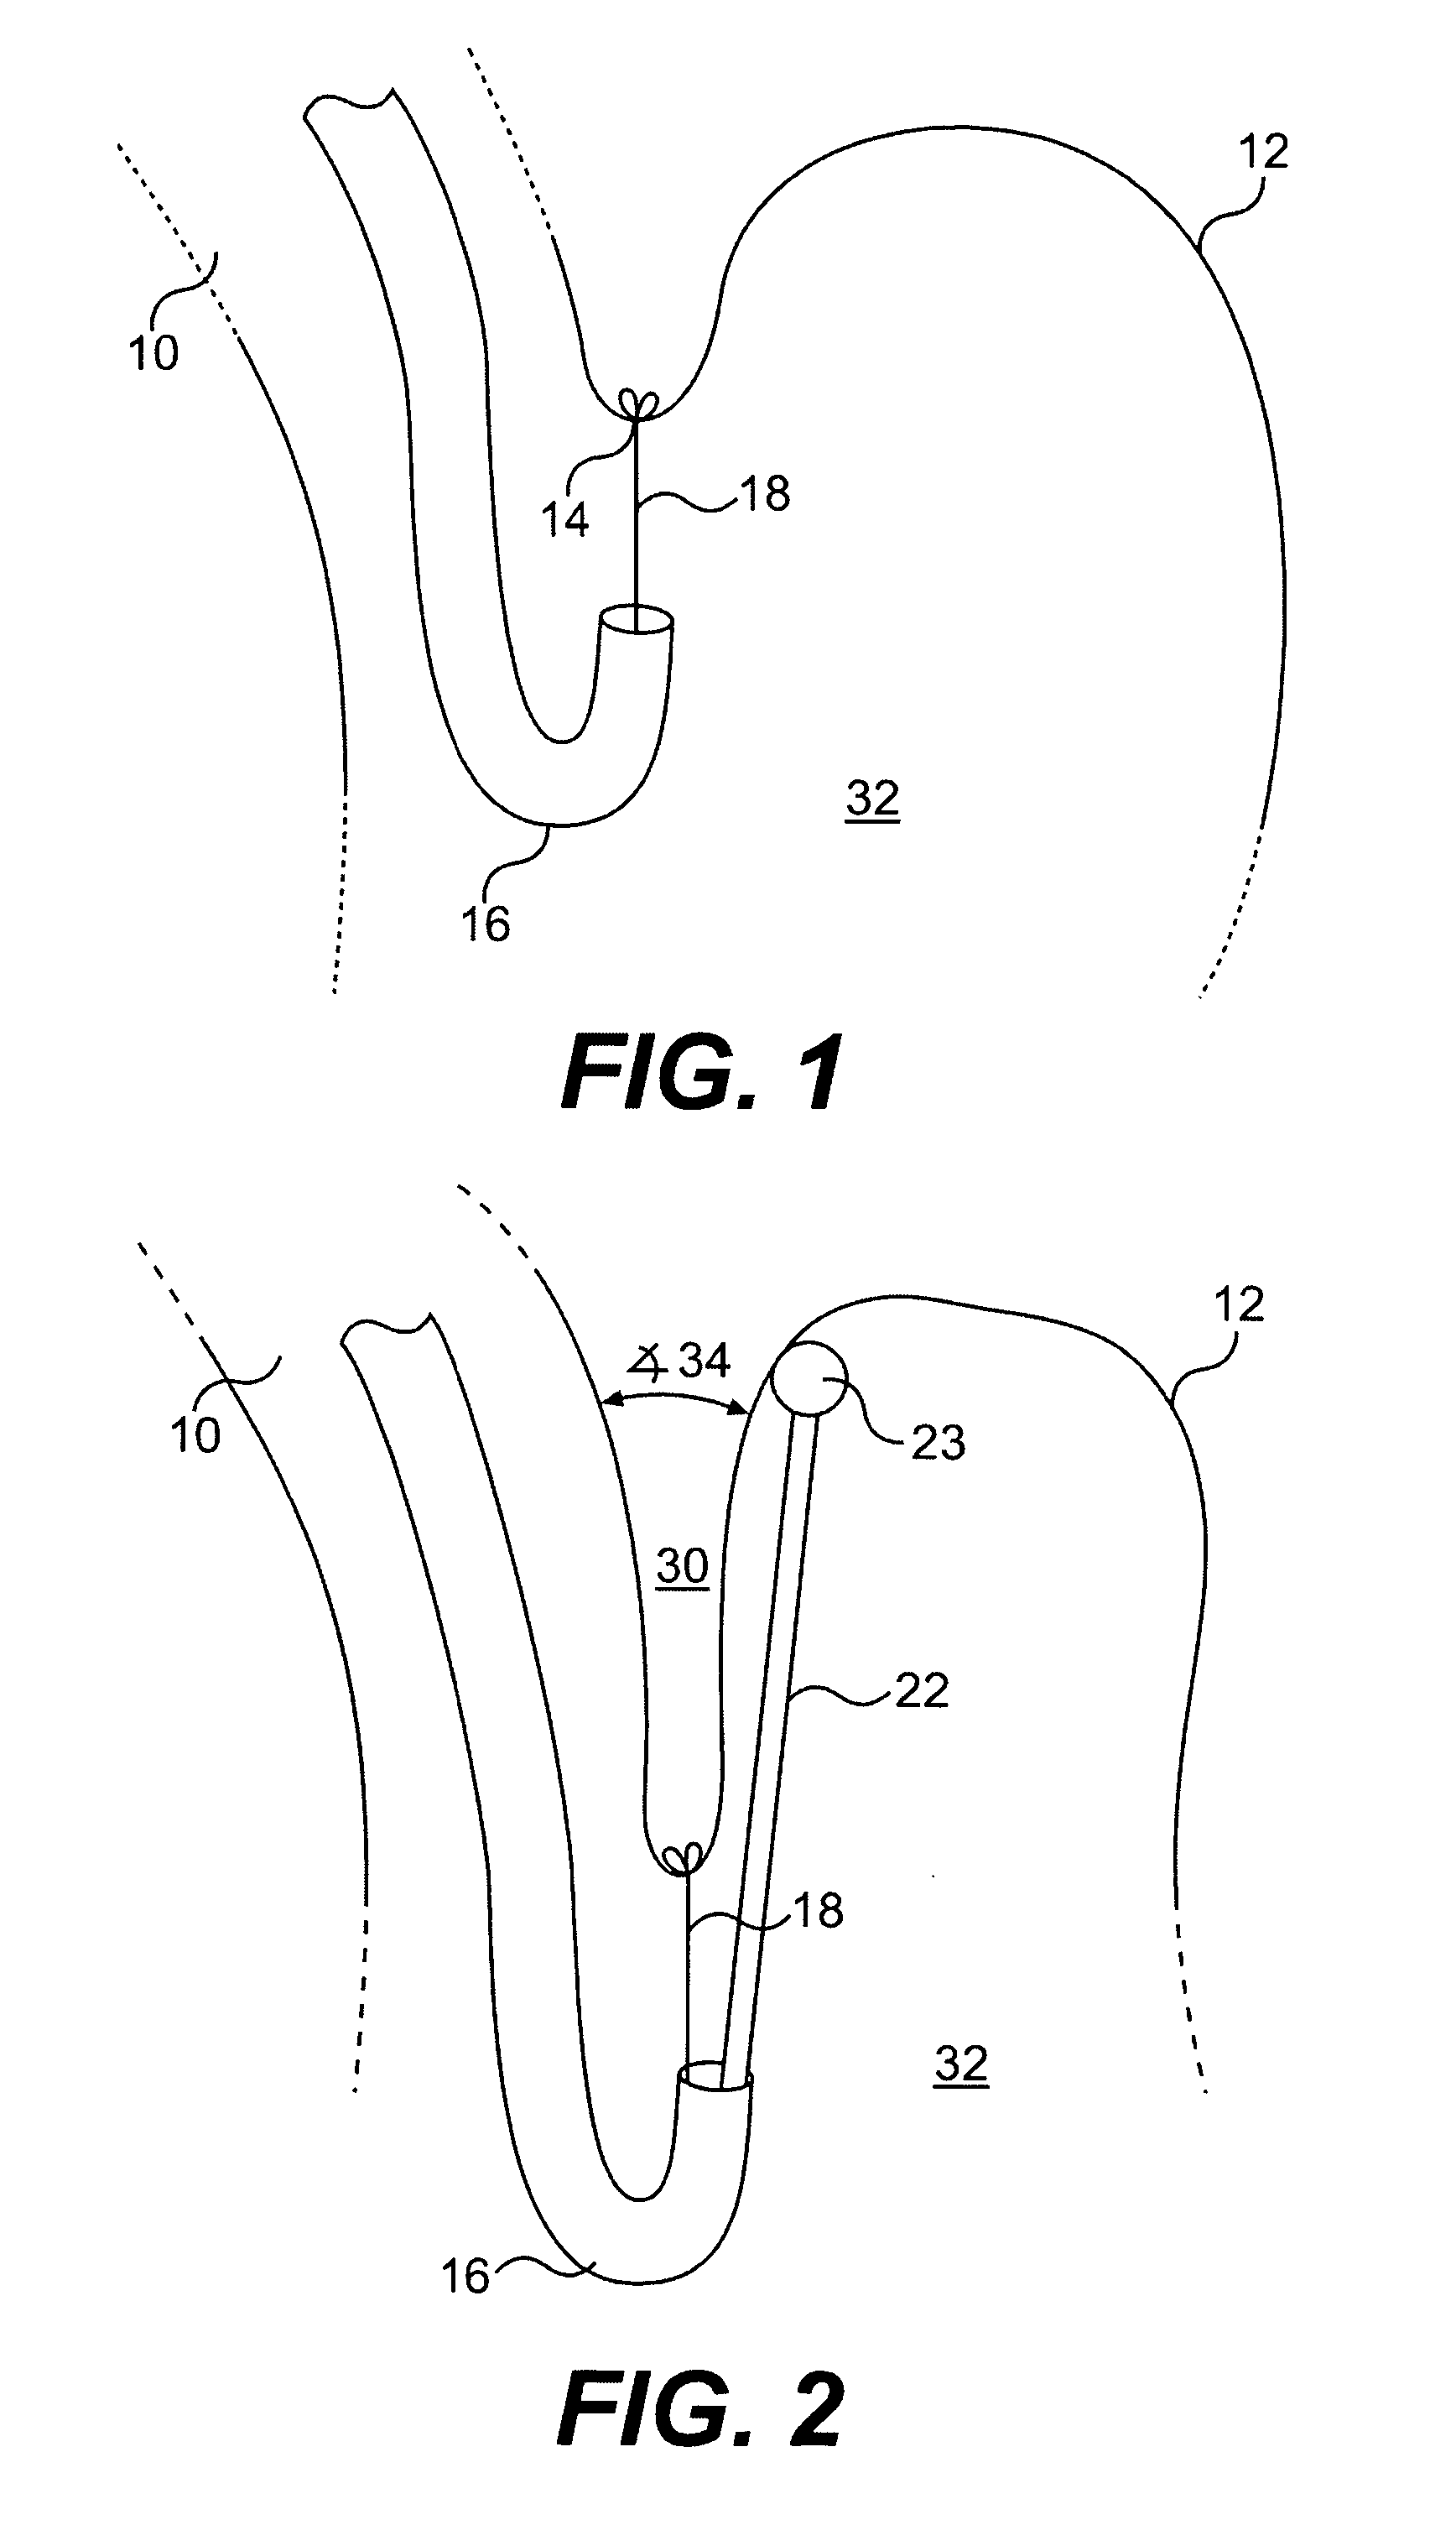 Method for performing endoluminal fundoplication and apparatus for use in the method